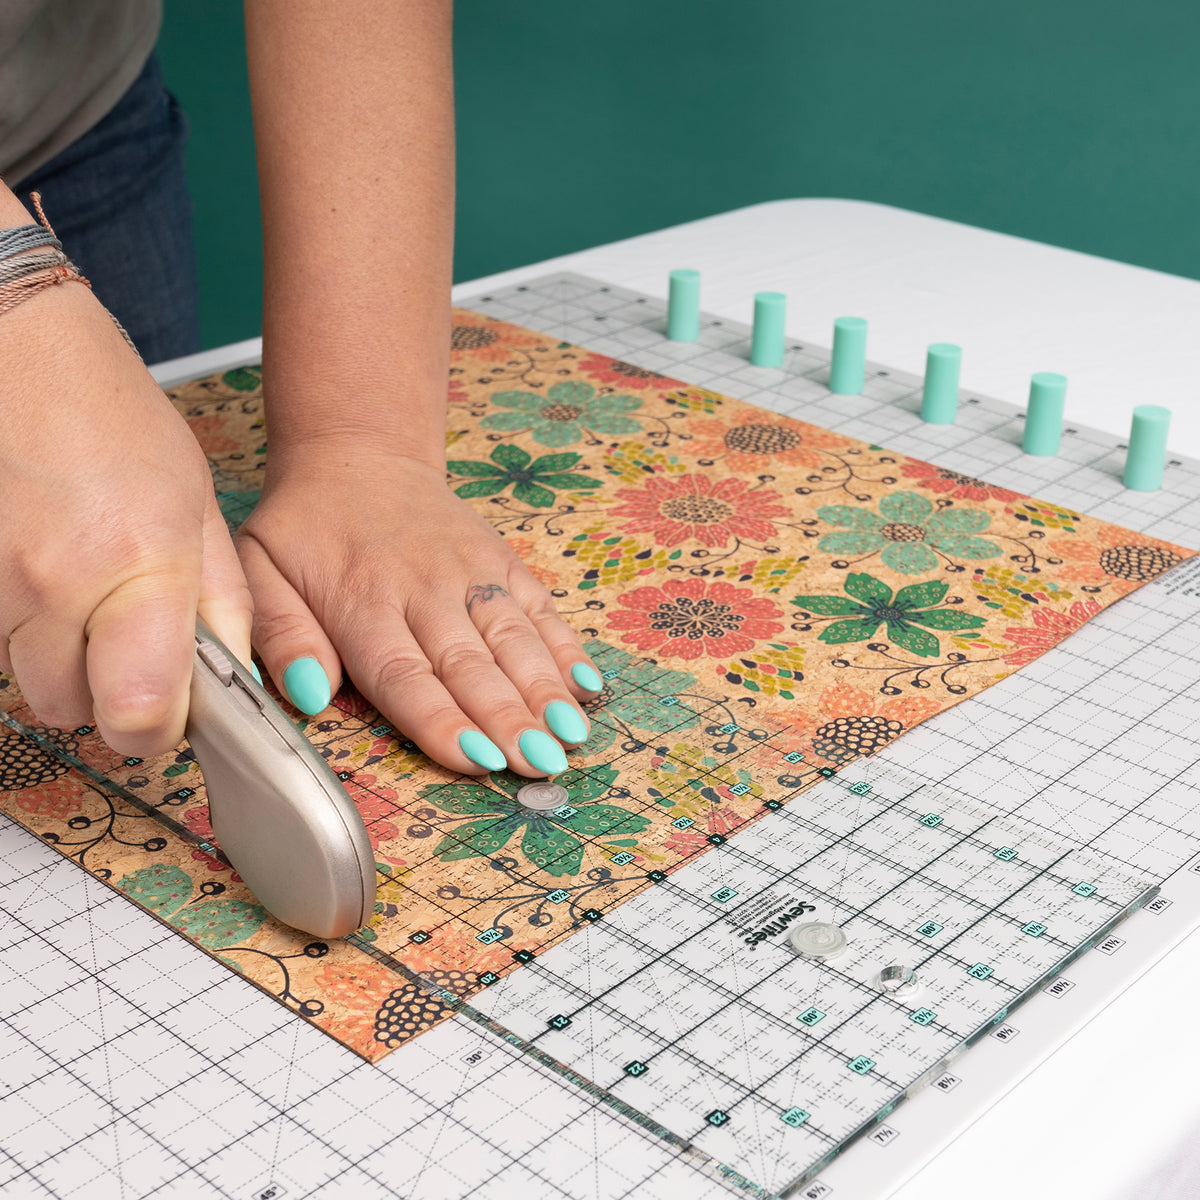 Cutting Mats, Rotary Cutters & Rulers for Fabric